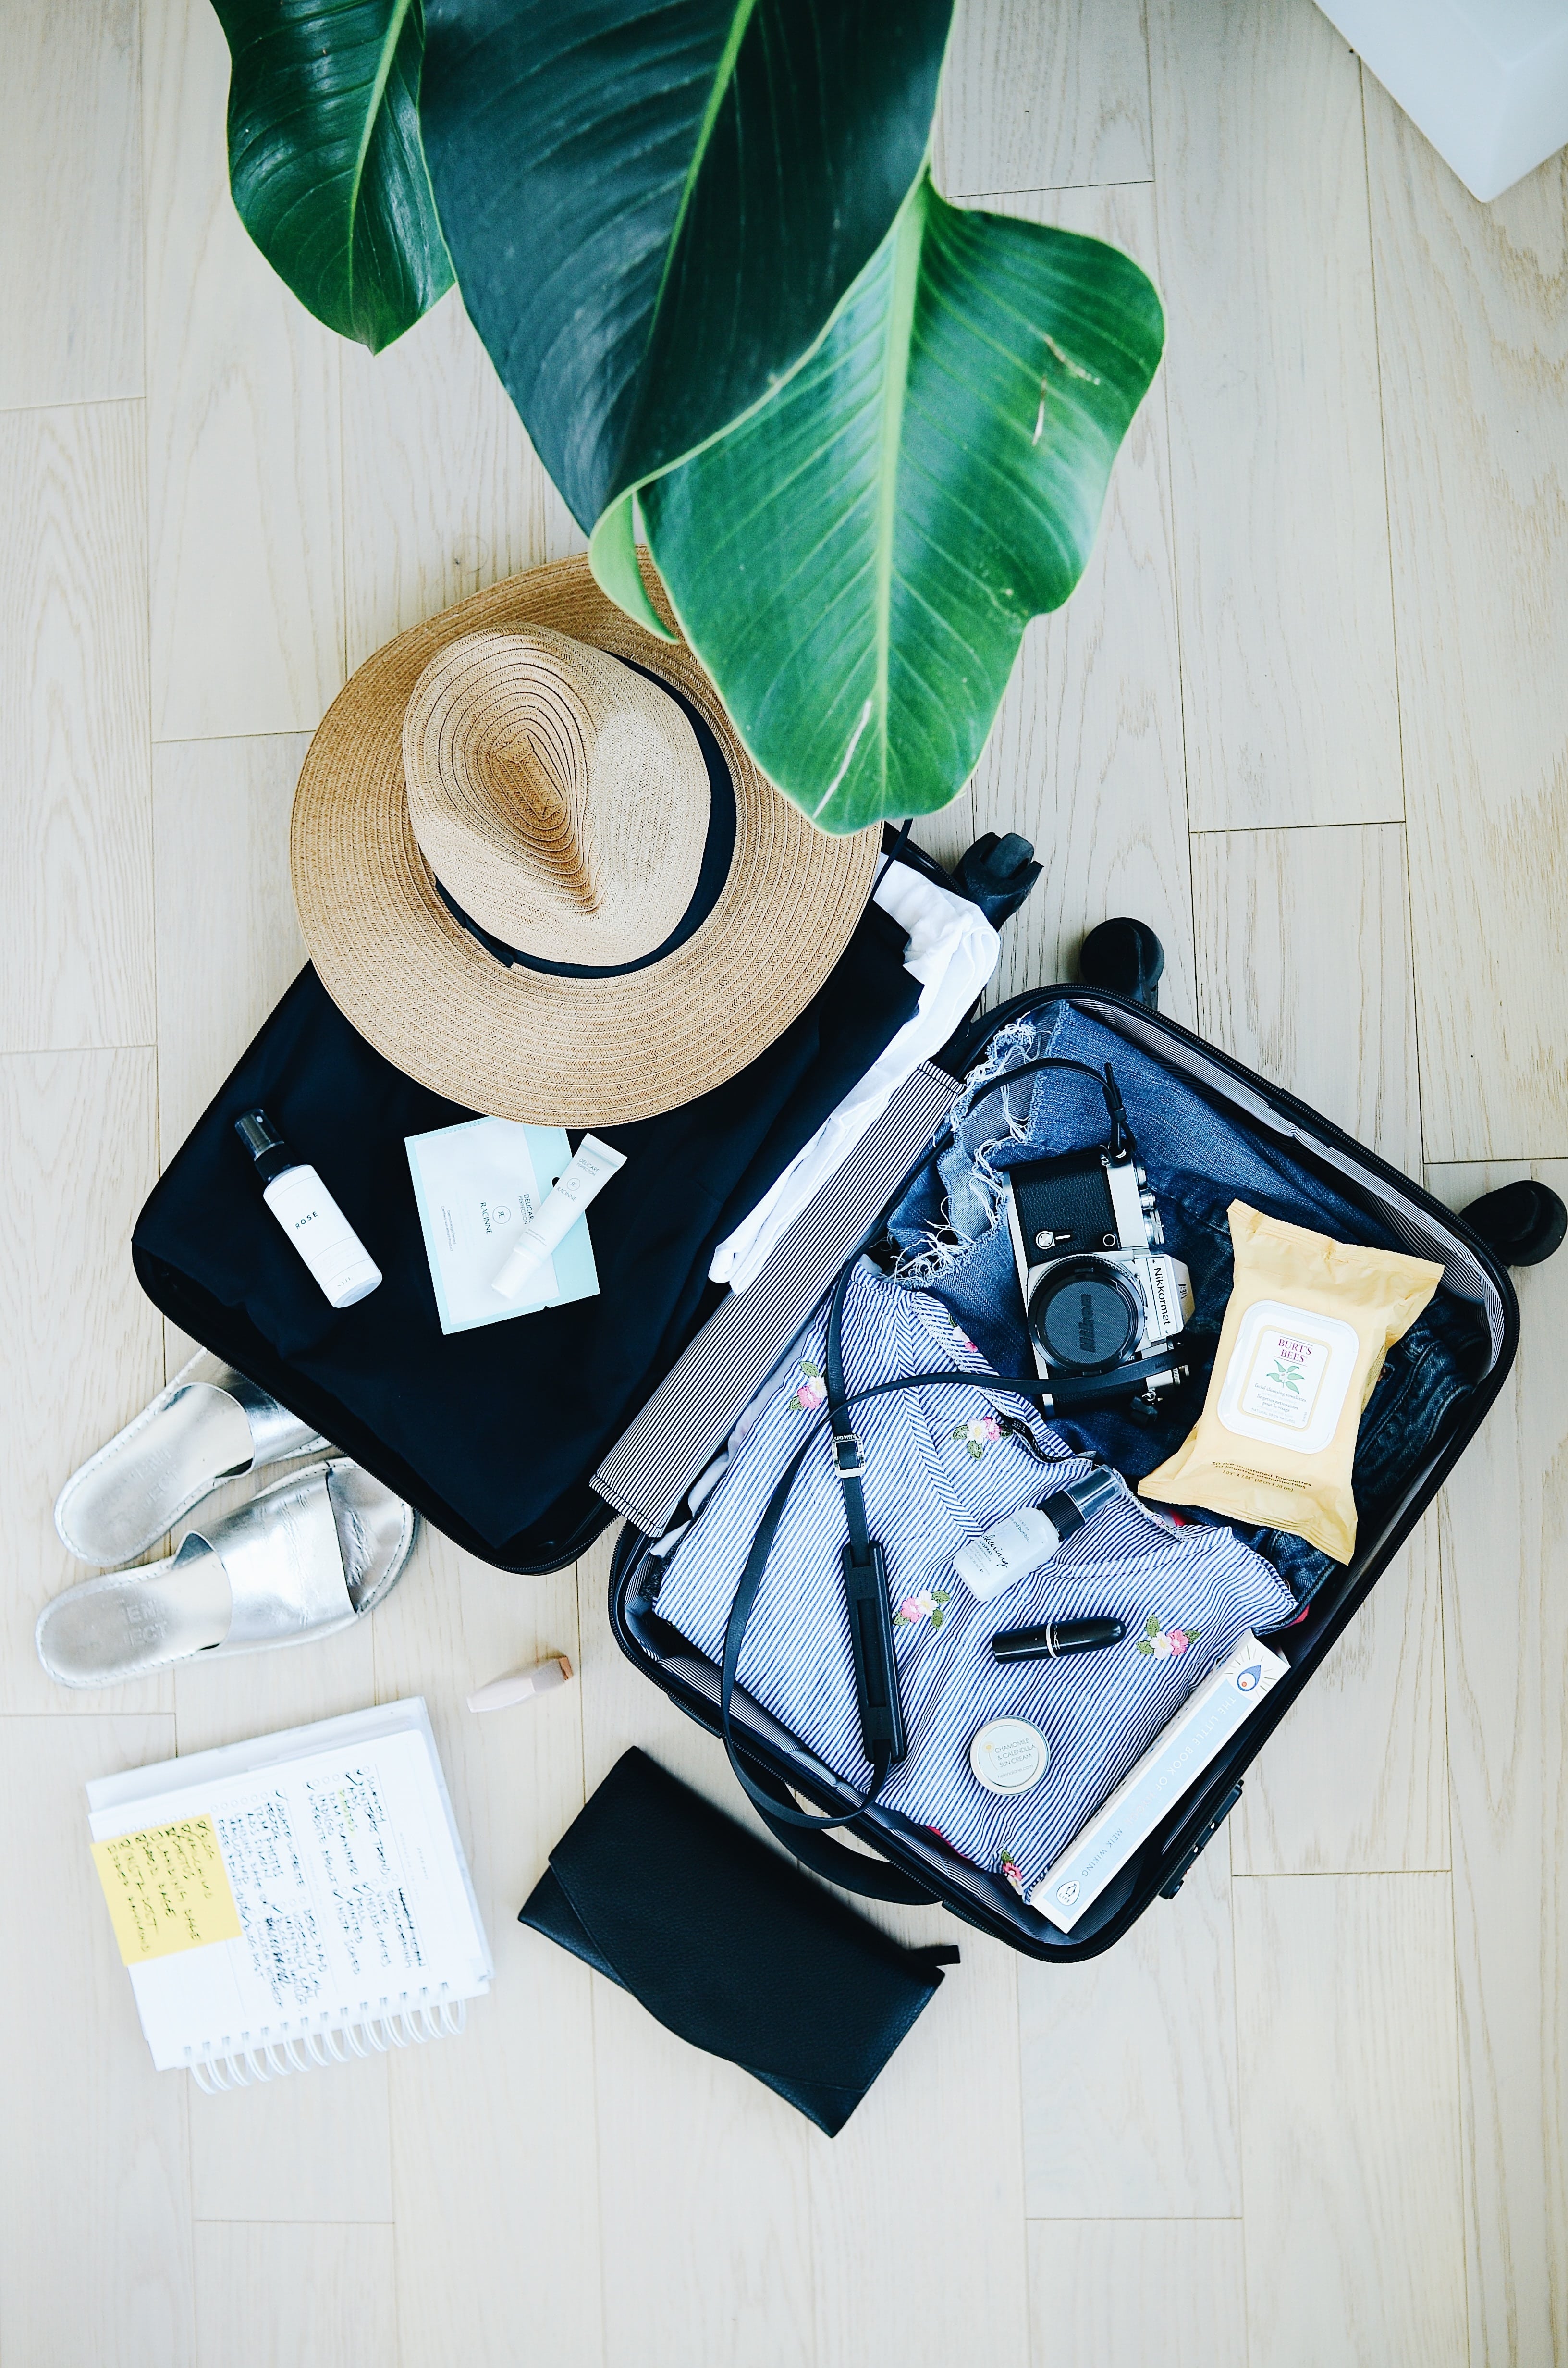 Say goodbye to lugging around bags and yes to packing minimally on your next trip